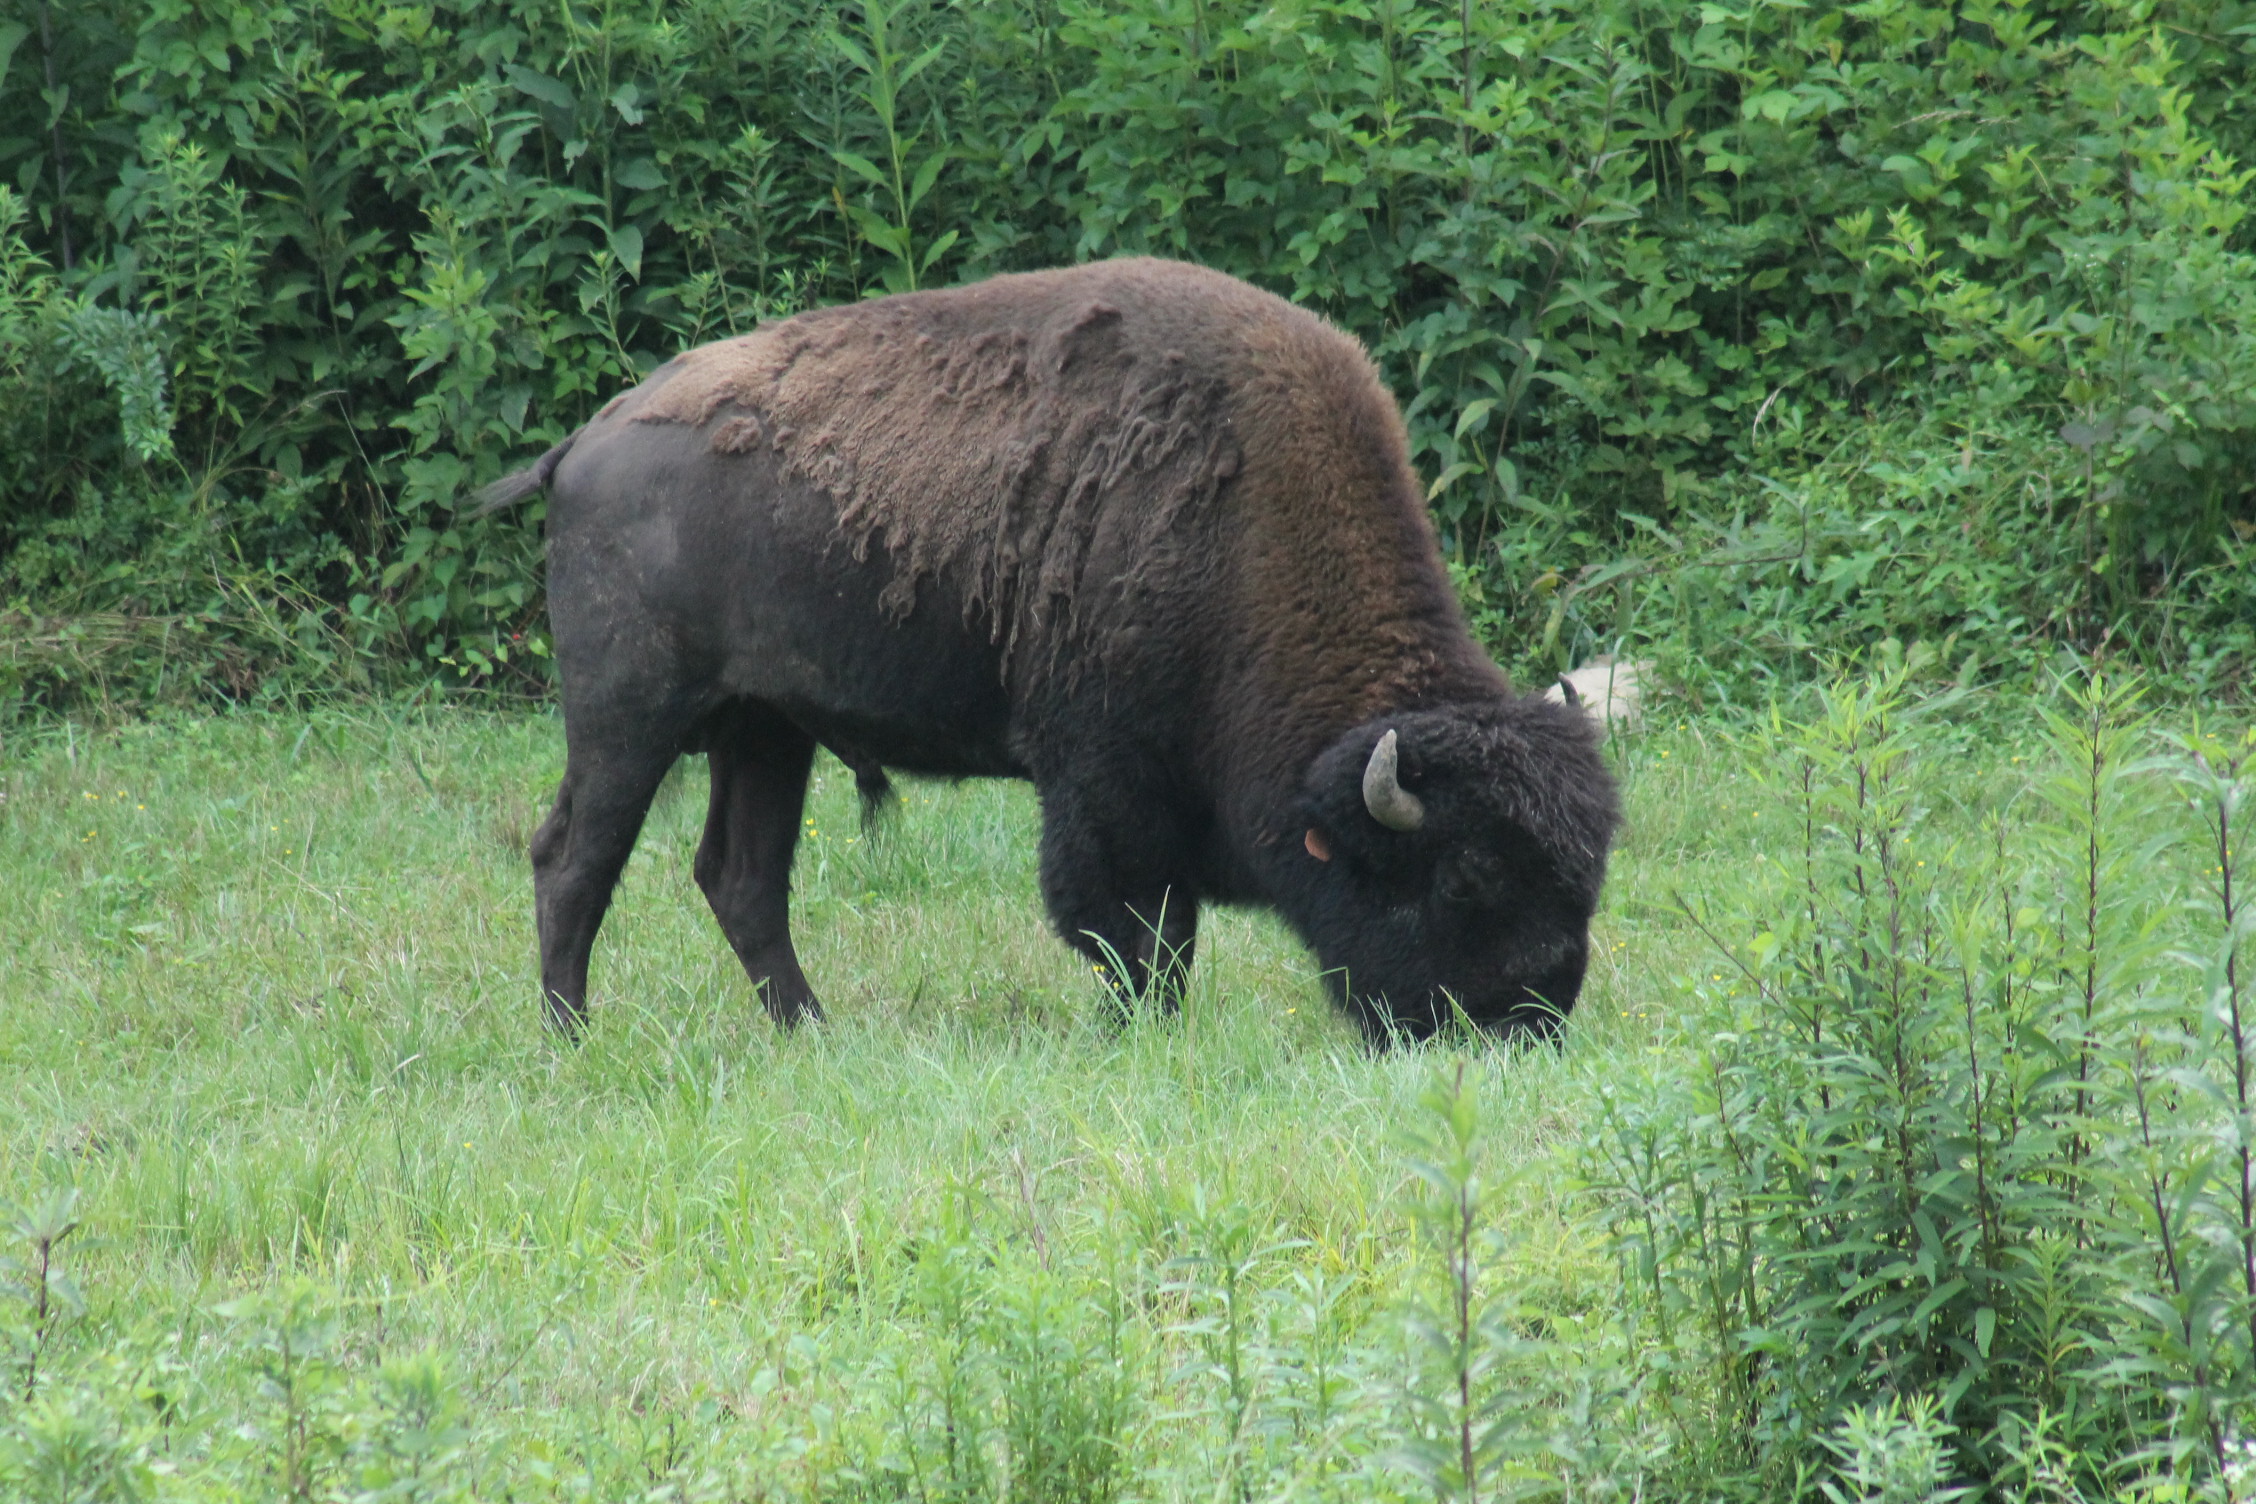 a large bison grazing in the grass near a forest